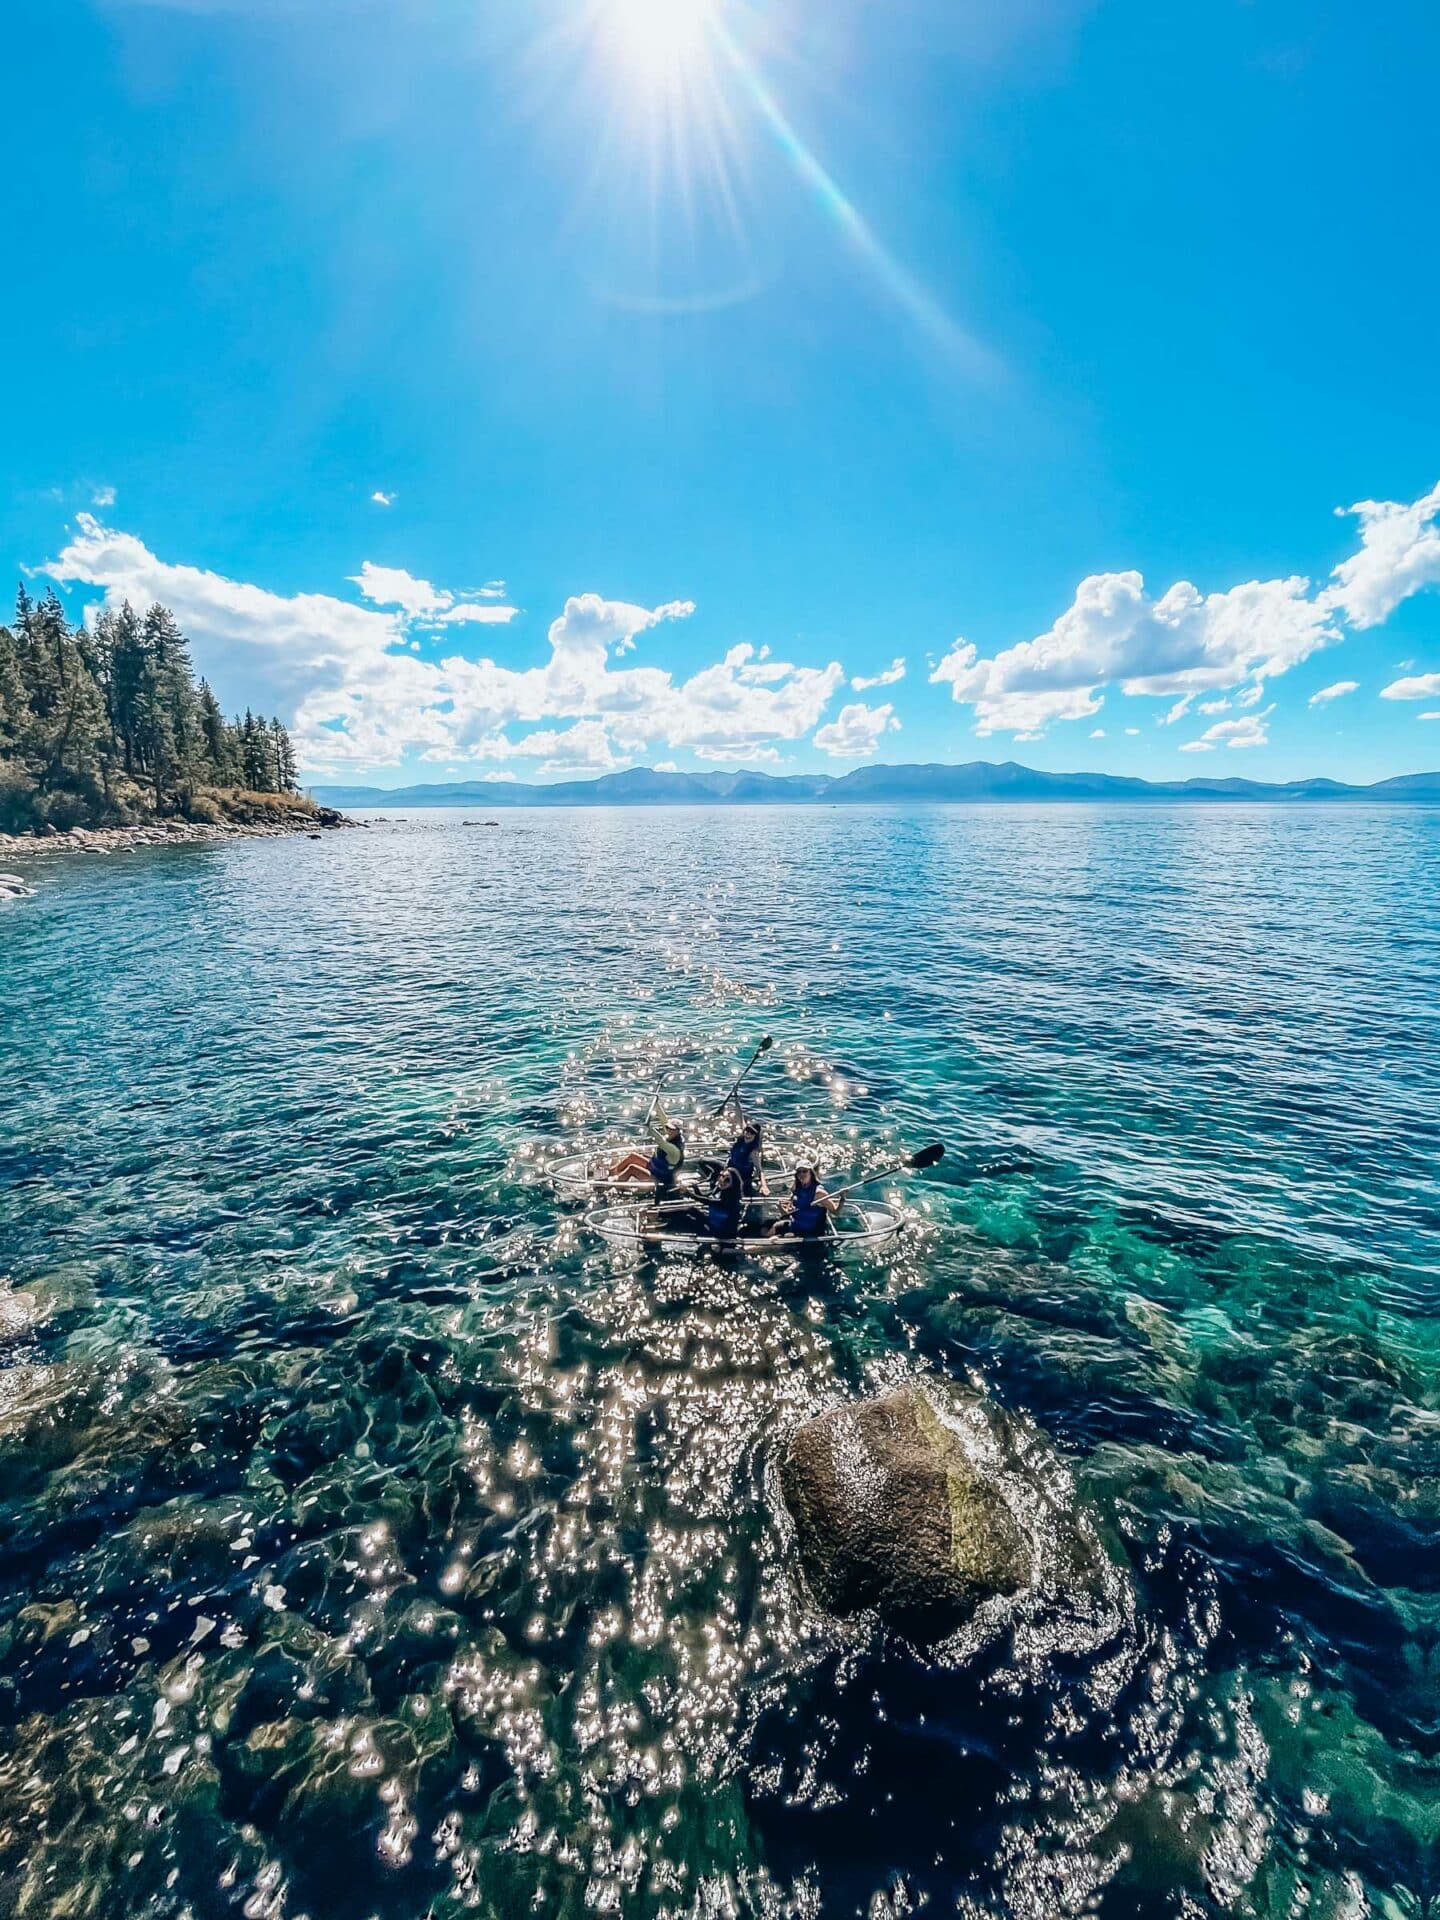 South Lake Tahoe summer itinerary, by travel blogger What The Fab